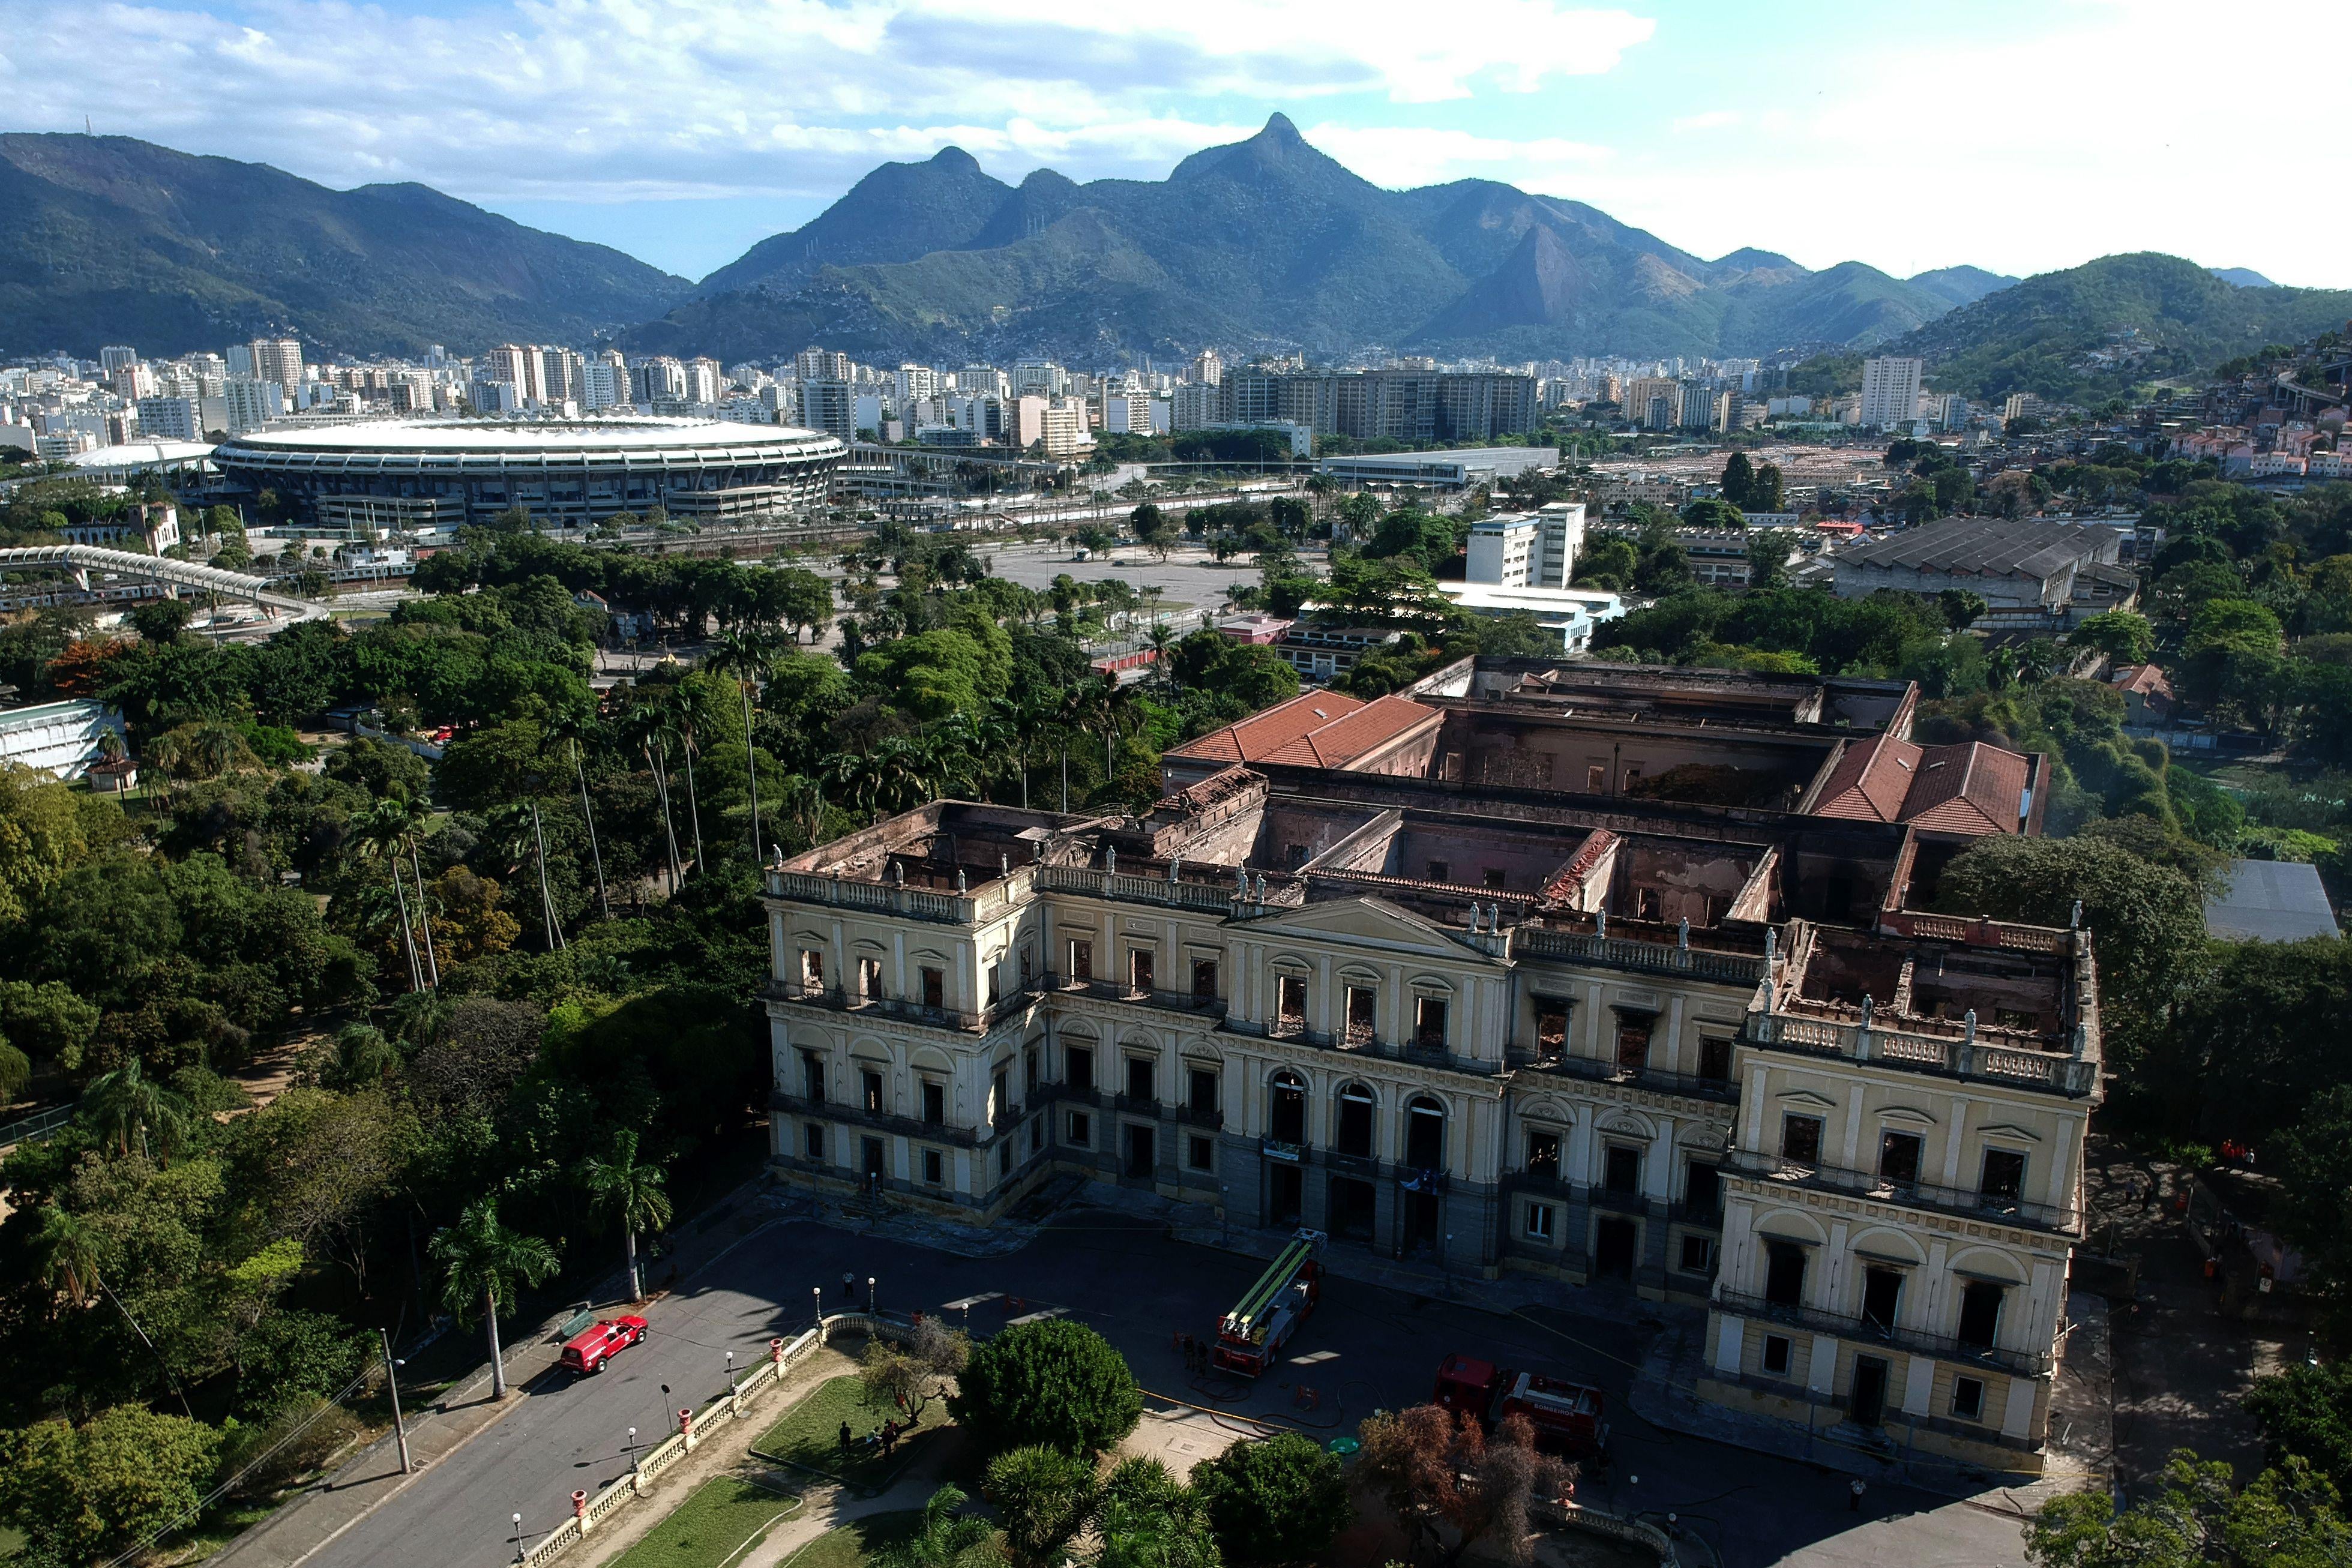 Drone view of Rio de Janeiro's treasured National Museum, the roof of which is largely gone after fires ravaged the building for five hours